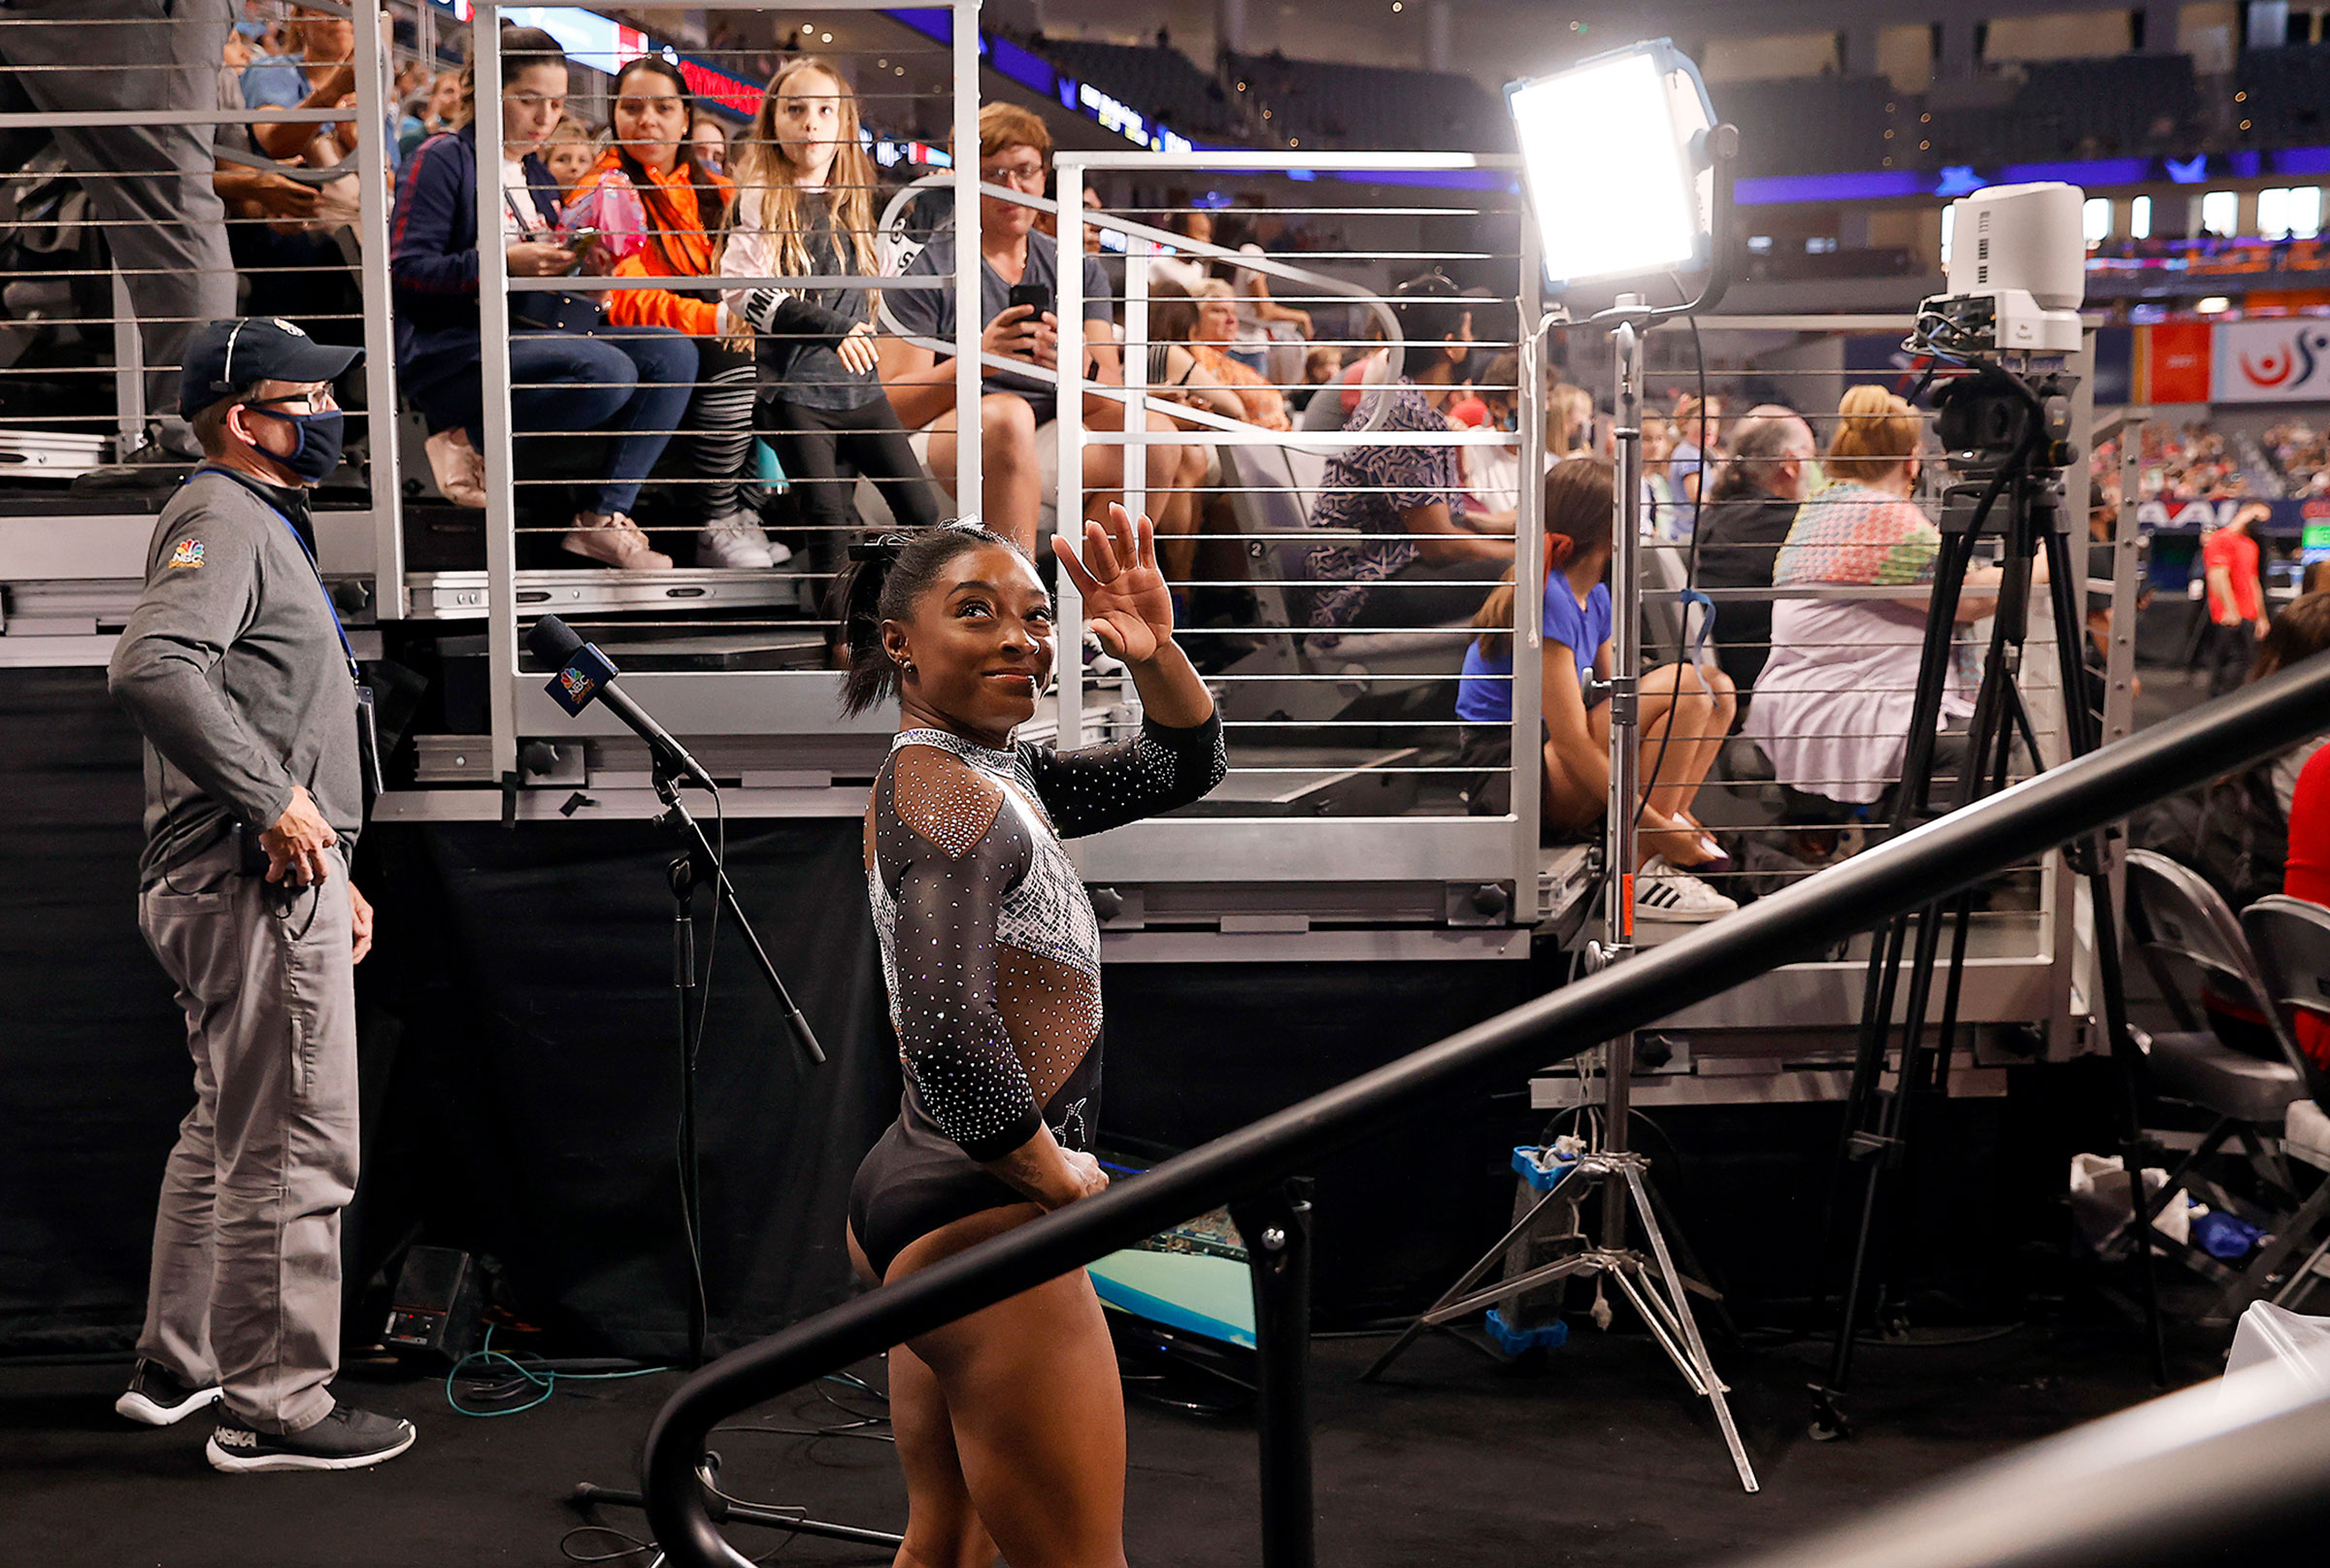 Biles waves after winning her seventh U.S. championship on June 6, 2021 in Fort Worth, Texas. (Jamie Squire—Getty Images)